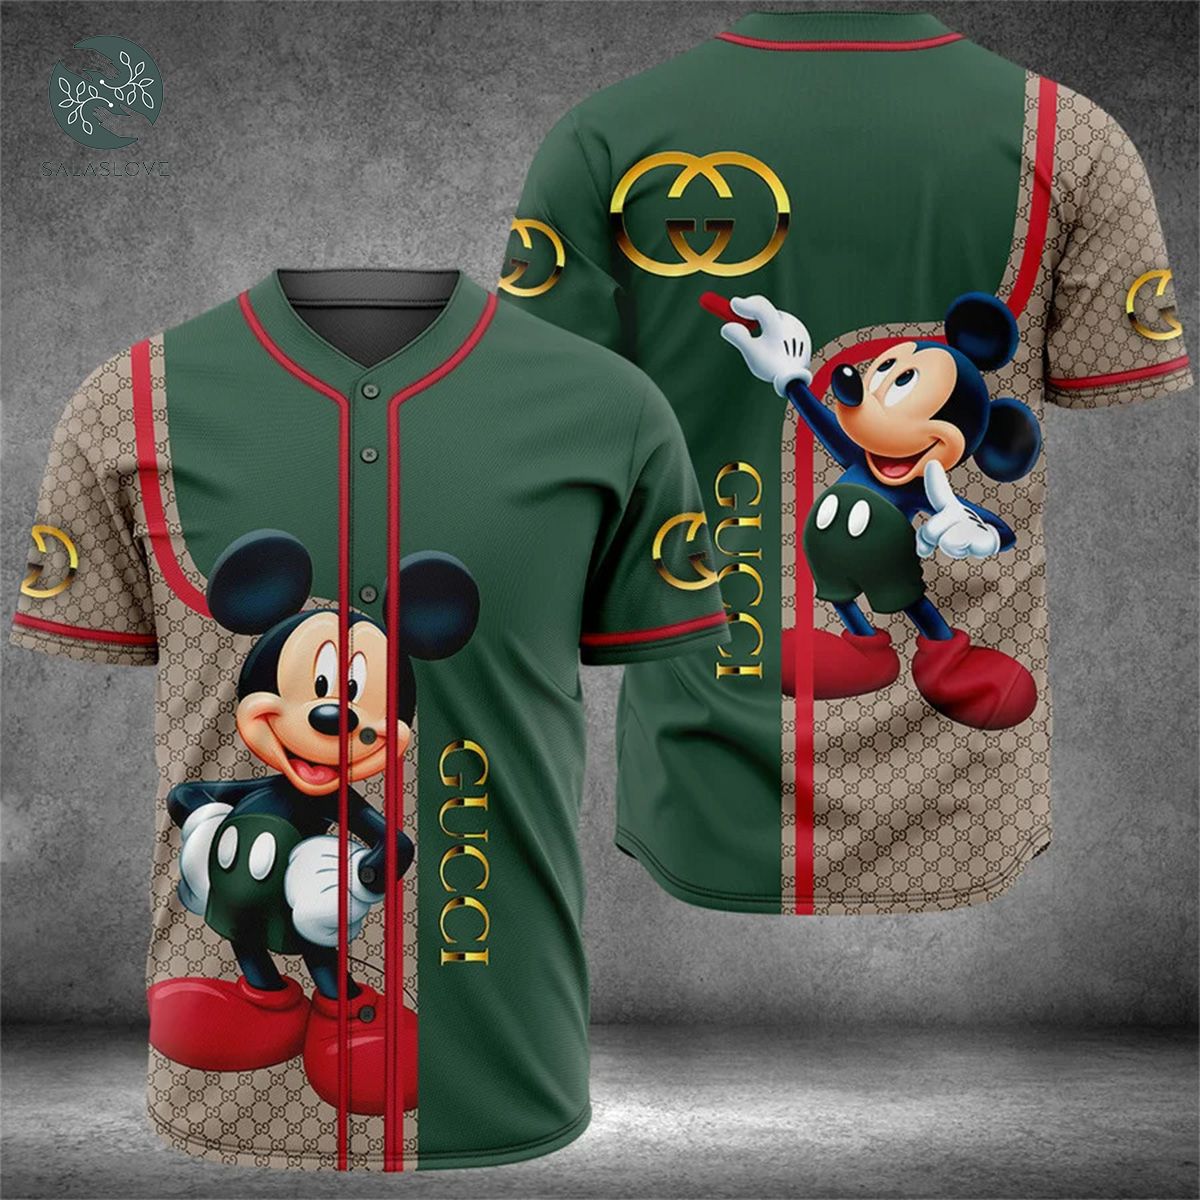 Gucci Mickey Mouse Baseball Jersey Shirt Luxury Clothing Clothes Sport Outfit Disney Gifts